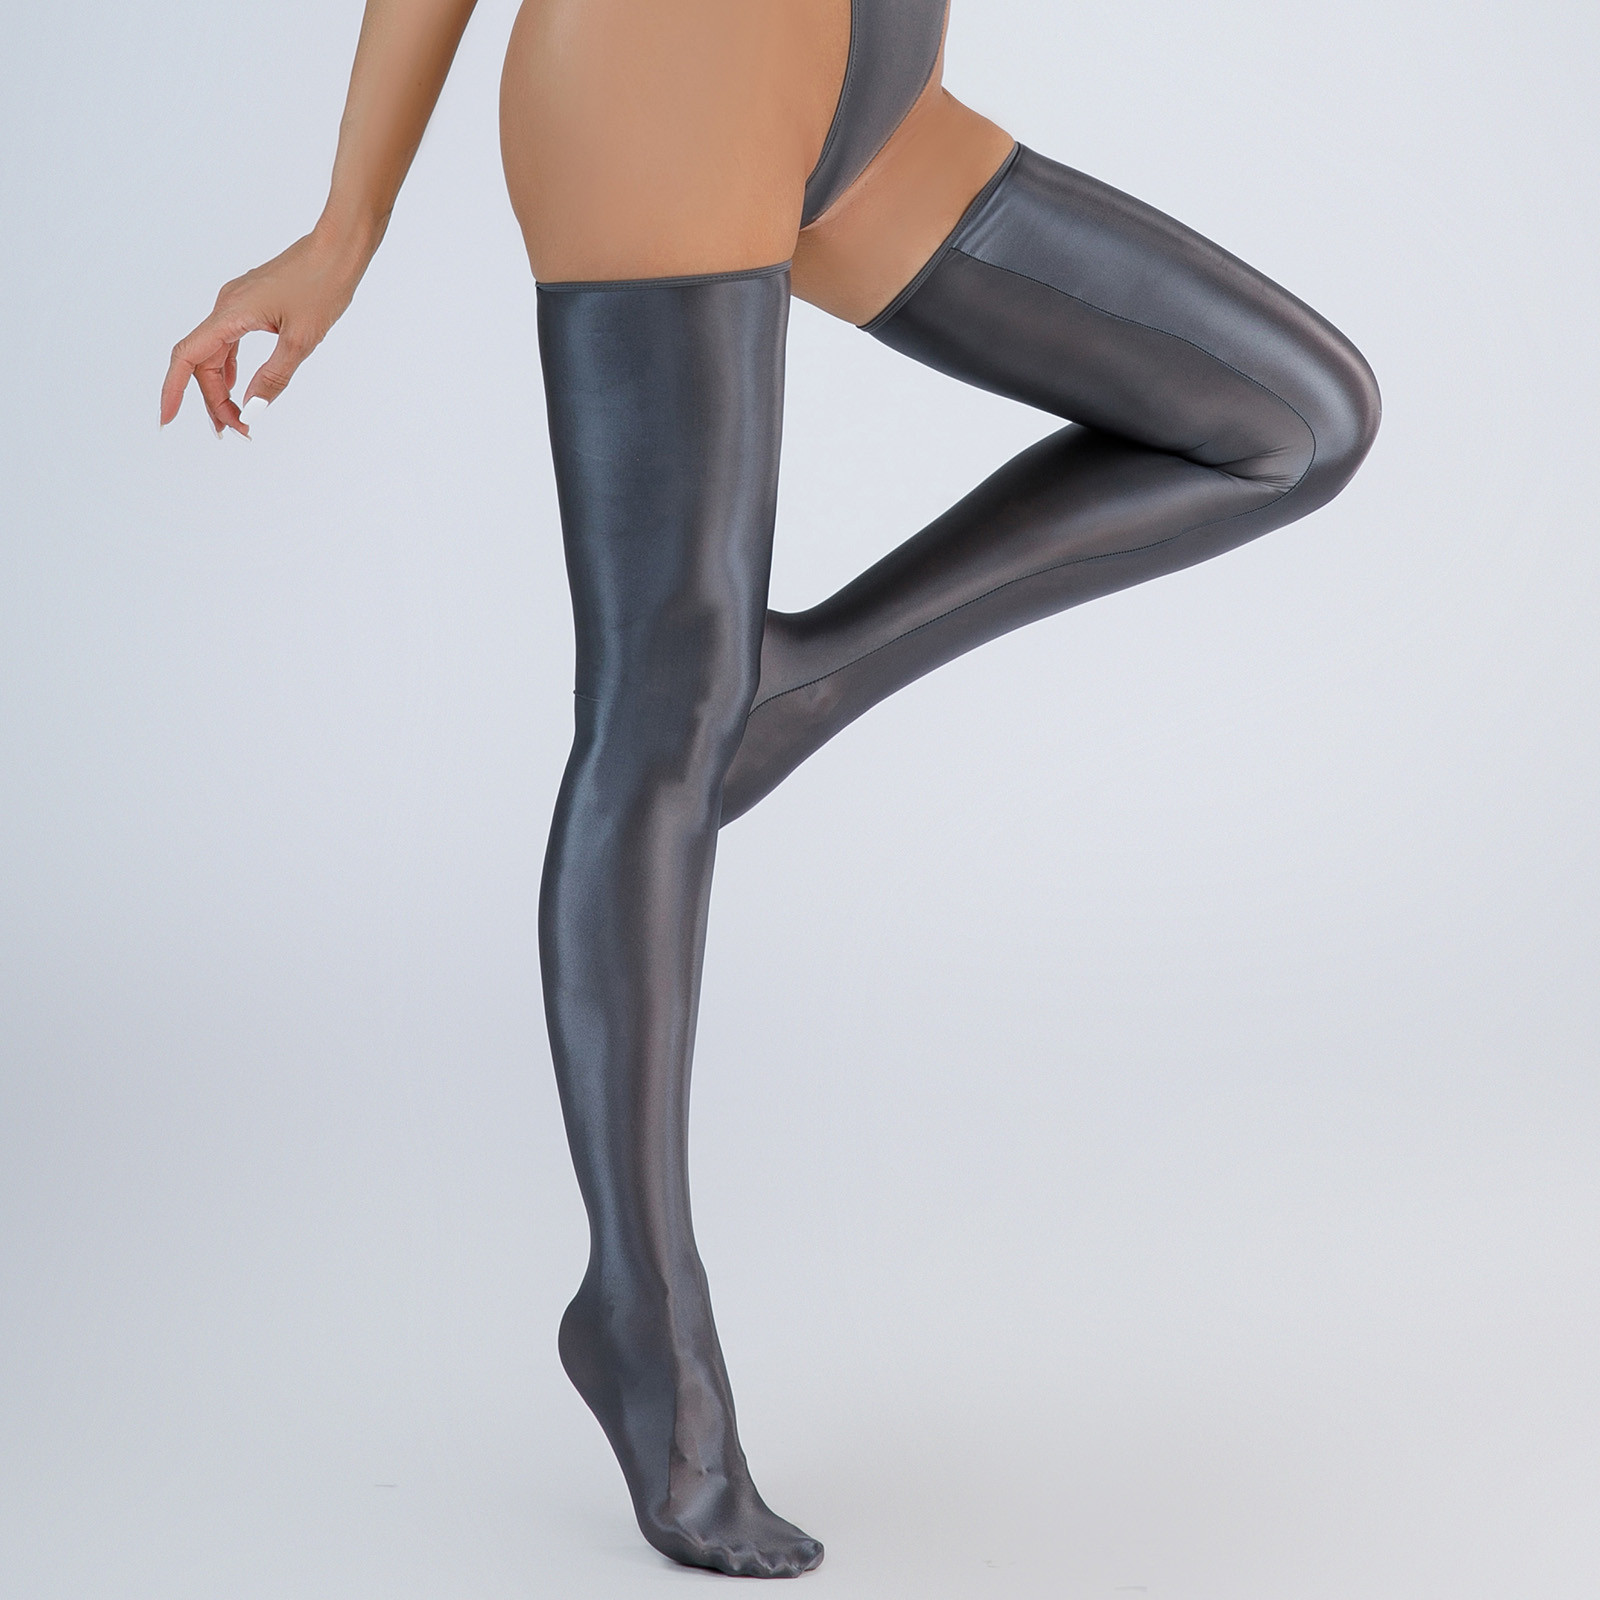 LowProfile High Waist Tights Stockings for Women Shiny Silk